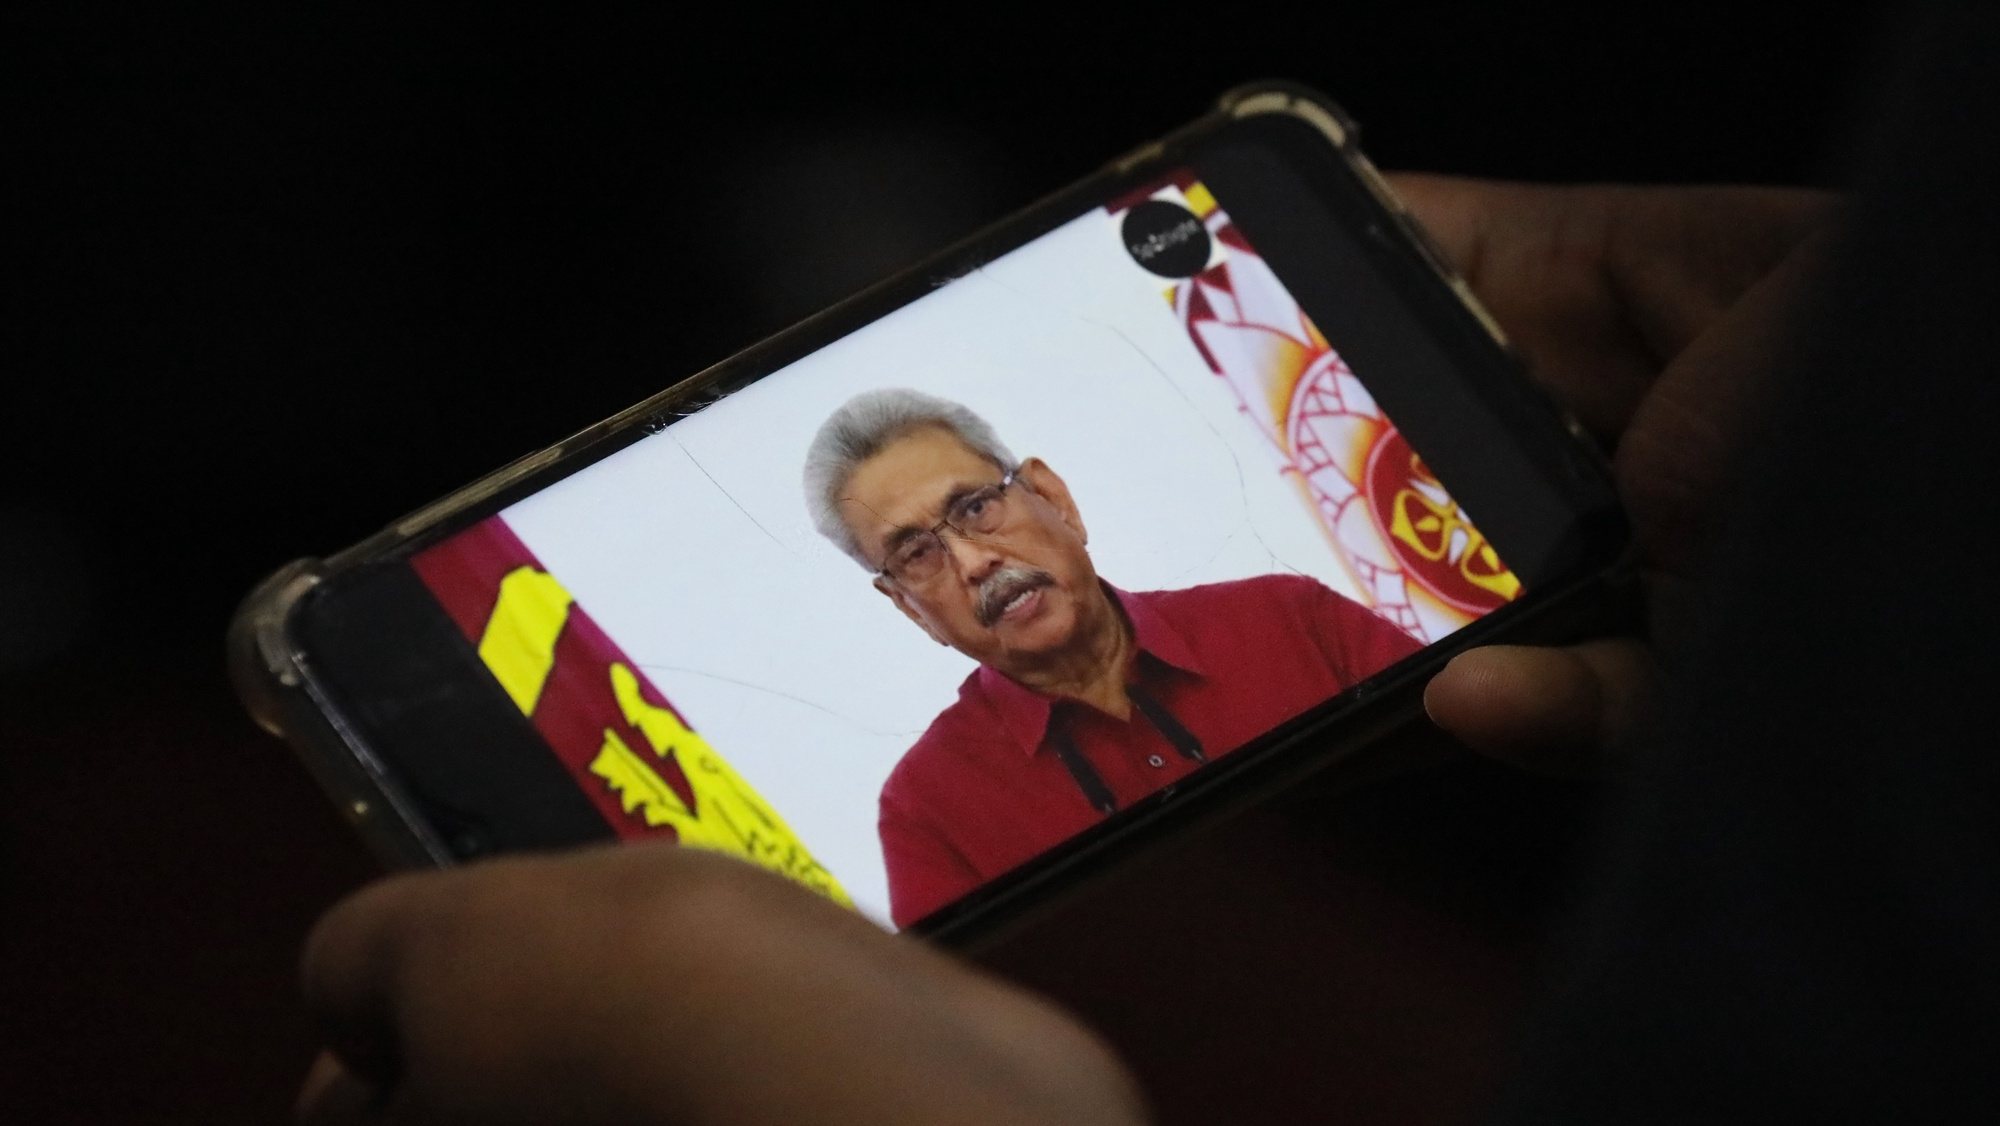 epa10062143 (FILE) - A person watches a video on a mobile phone of Sri Lanka President Gotabaya Rajapaksa addressing the nation on television, in Colombo, Sri Lanka, 11 May 2022 (reissued 09 July 2022). Sri Lankan President Rajapaksa on 09 July 2022 has agreed to resign on 13 July, the parliament&#039;s speaker said in a statement after a party leaders&#039; meeting. Thousands of protesters broke through police barricades and stormed the president&#039;s official residence during anti-government protest in Colombo. Violent protests have been rocking the country for months over the government&#039;s alleged failure to address the worst economic crisis in decades.  EPA/CHAMILA KARUNARATHNE *** Local Caption *** 57671416